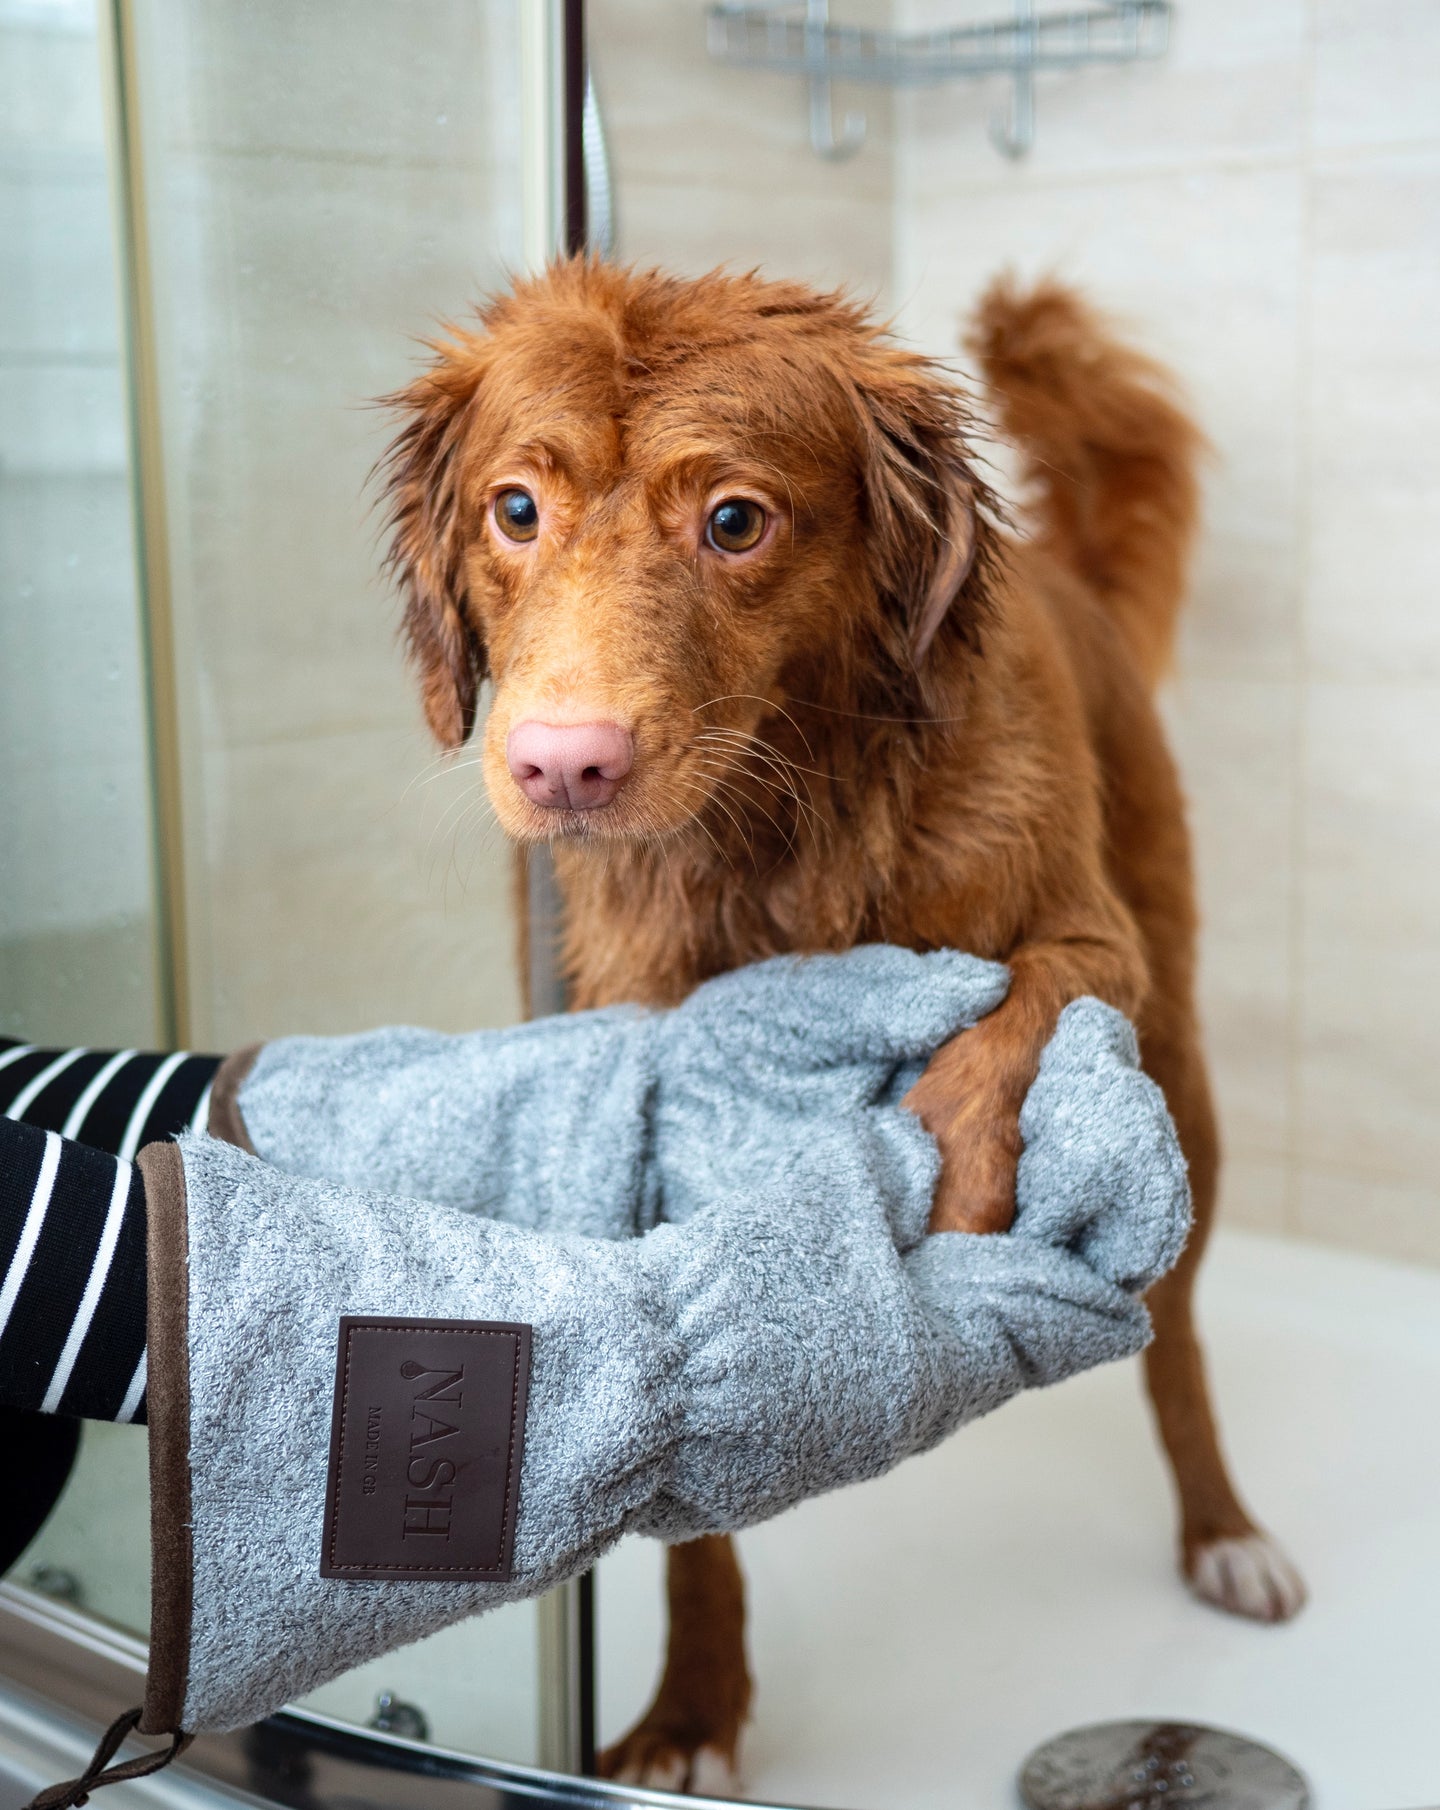 Keeping Your Dog Clean Between Baths